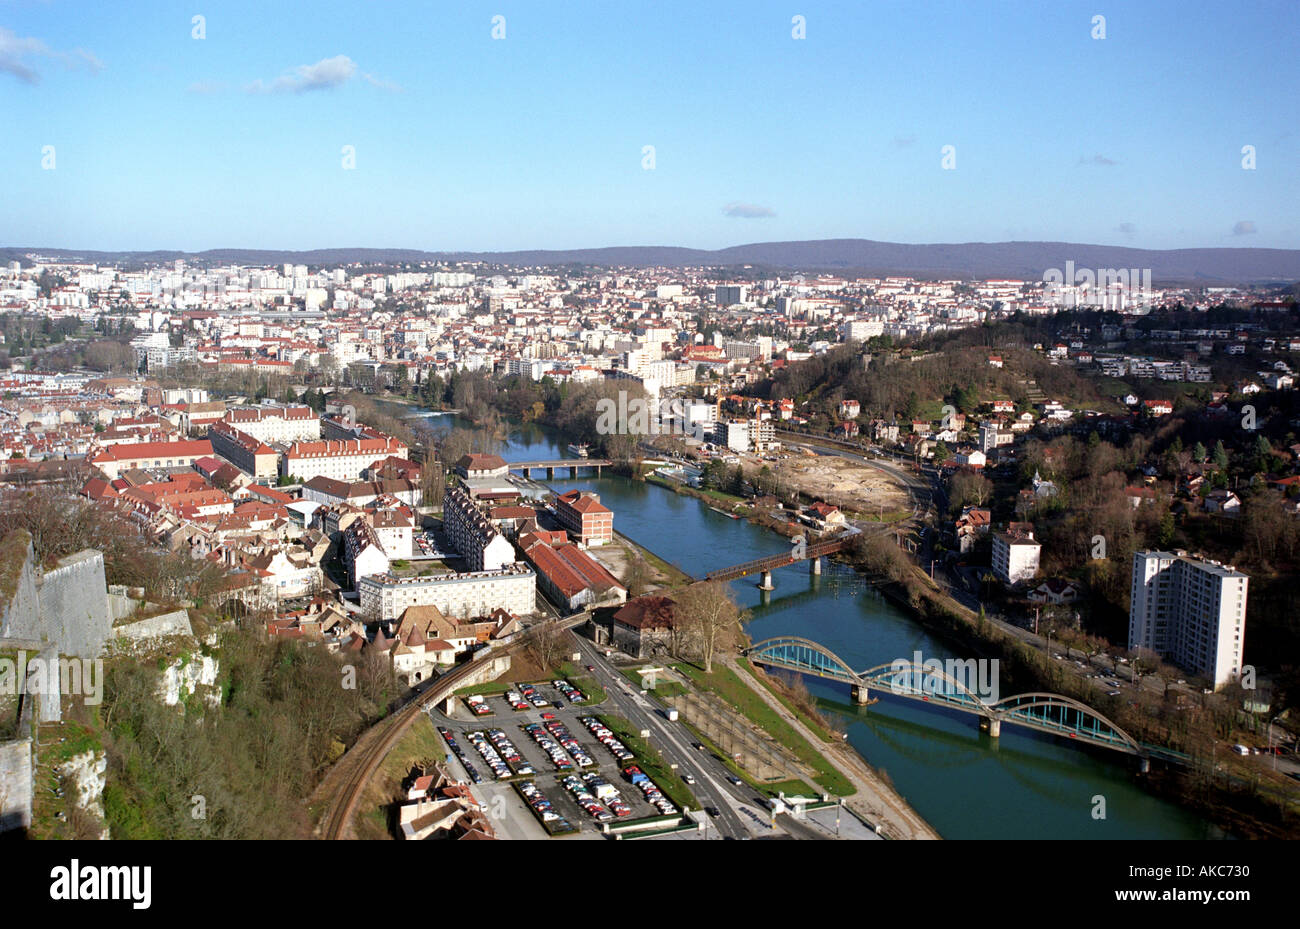 View of Besancon from La Citadelle de Besancon or The Citadel of Besancon in the French Comte region of France Stock Photo